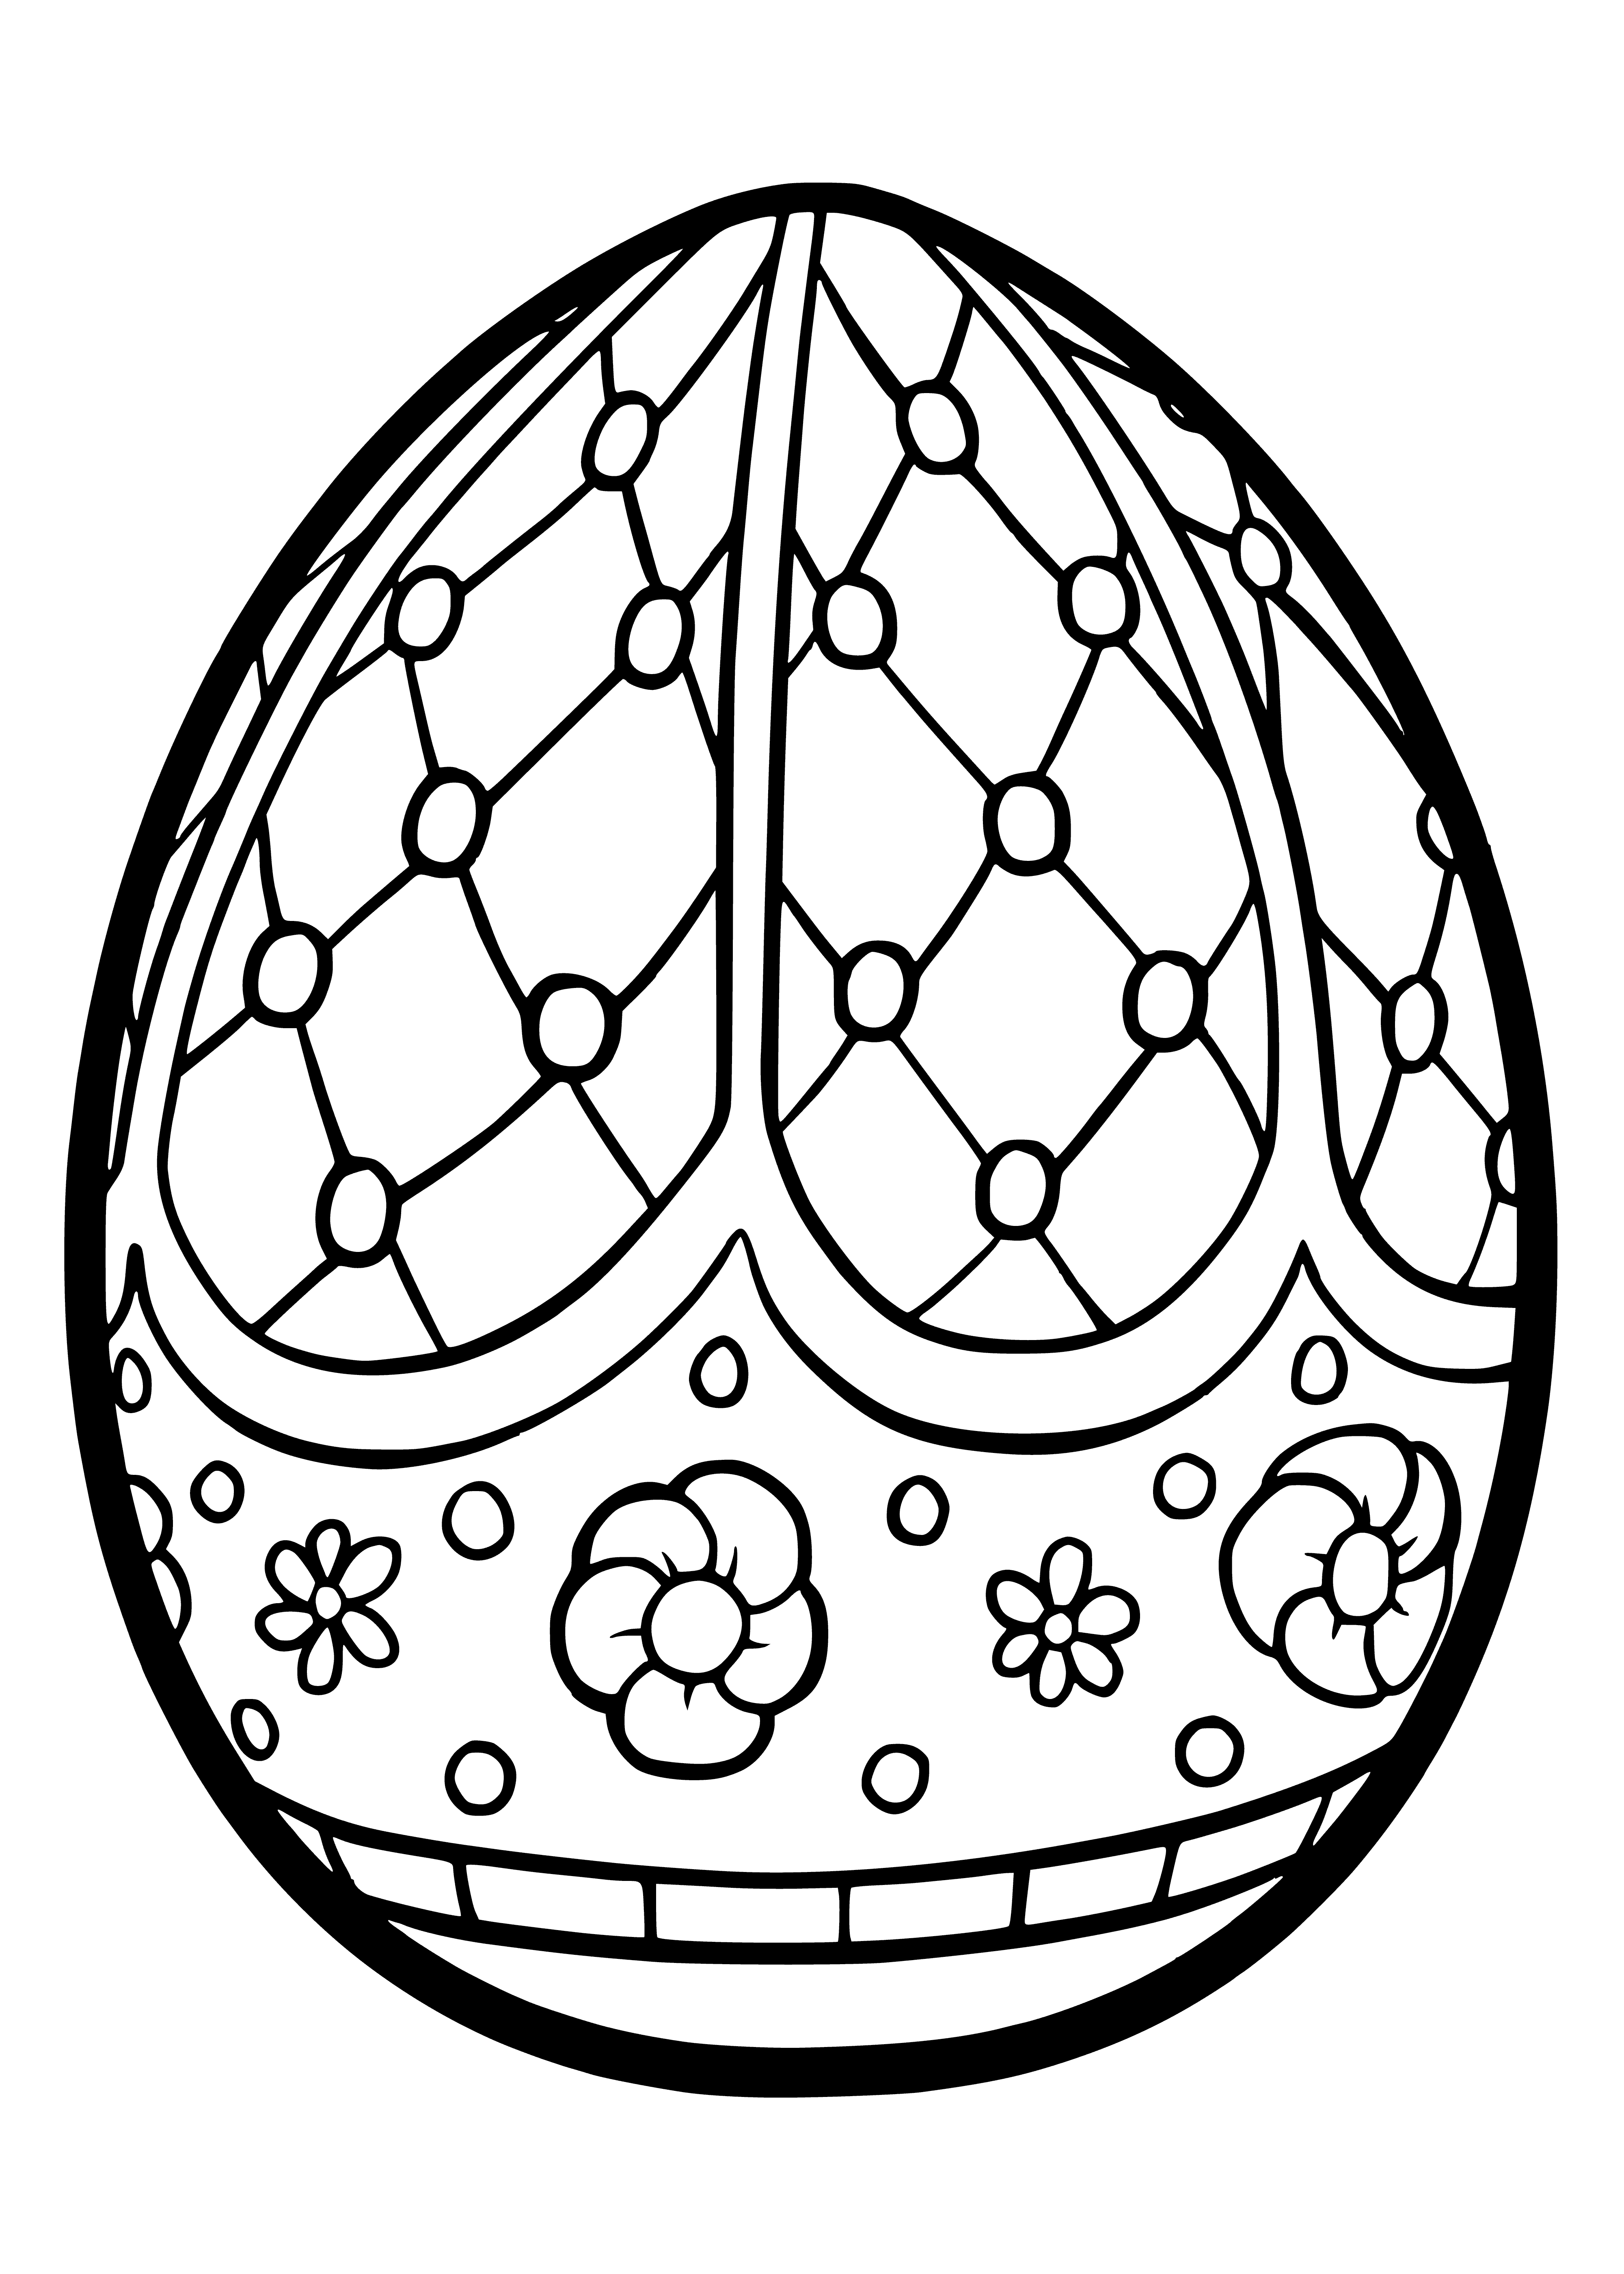 coloring page: 3 Easter eggs: brown (largest), white (middle), yellow (smallest), all w/ unique designs.